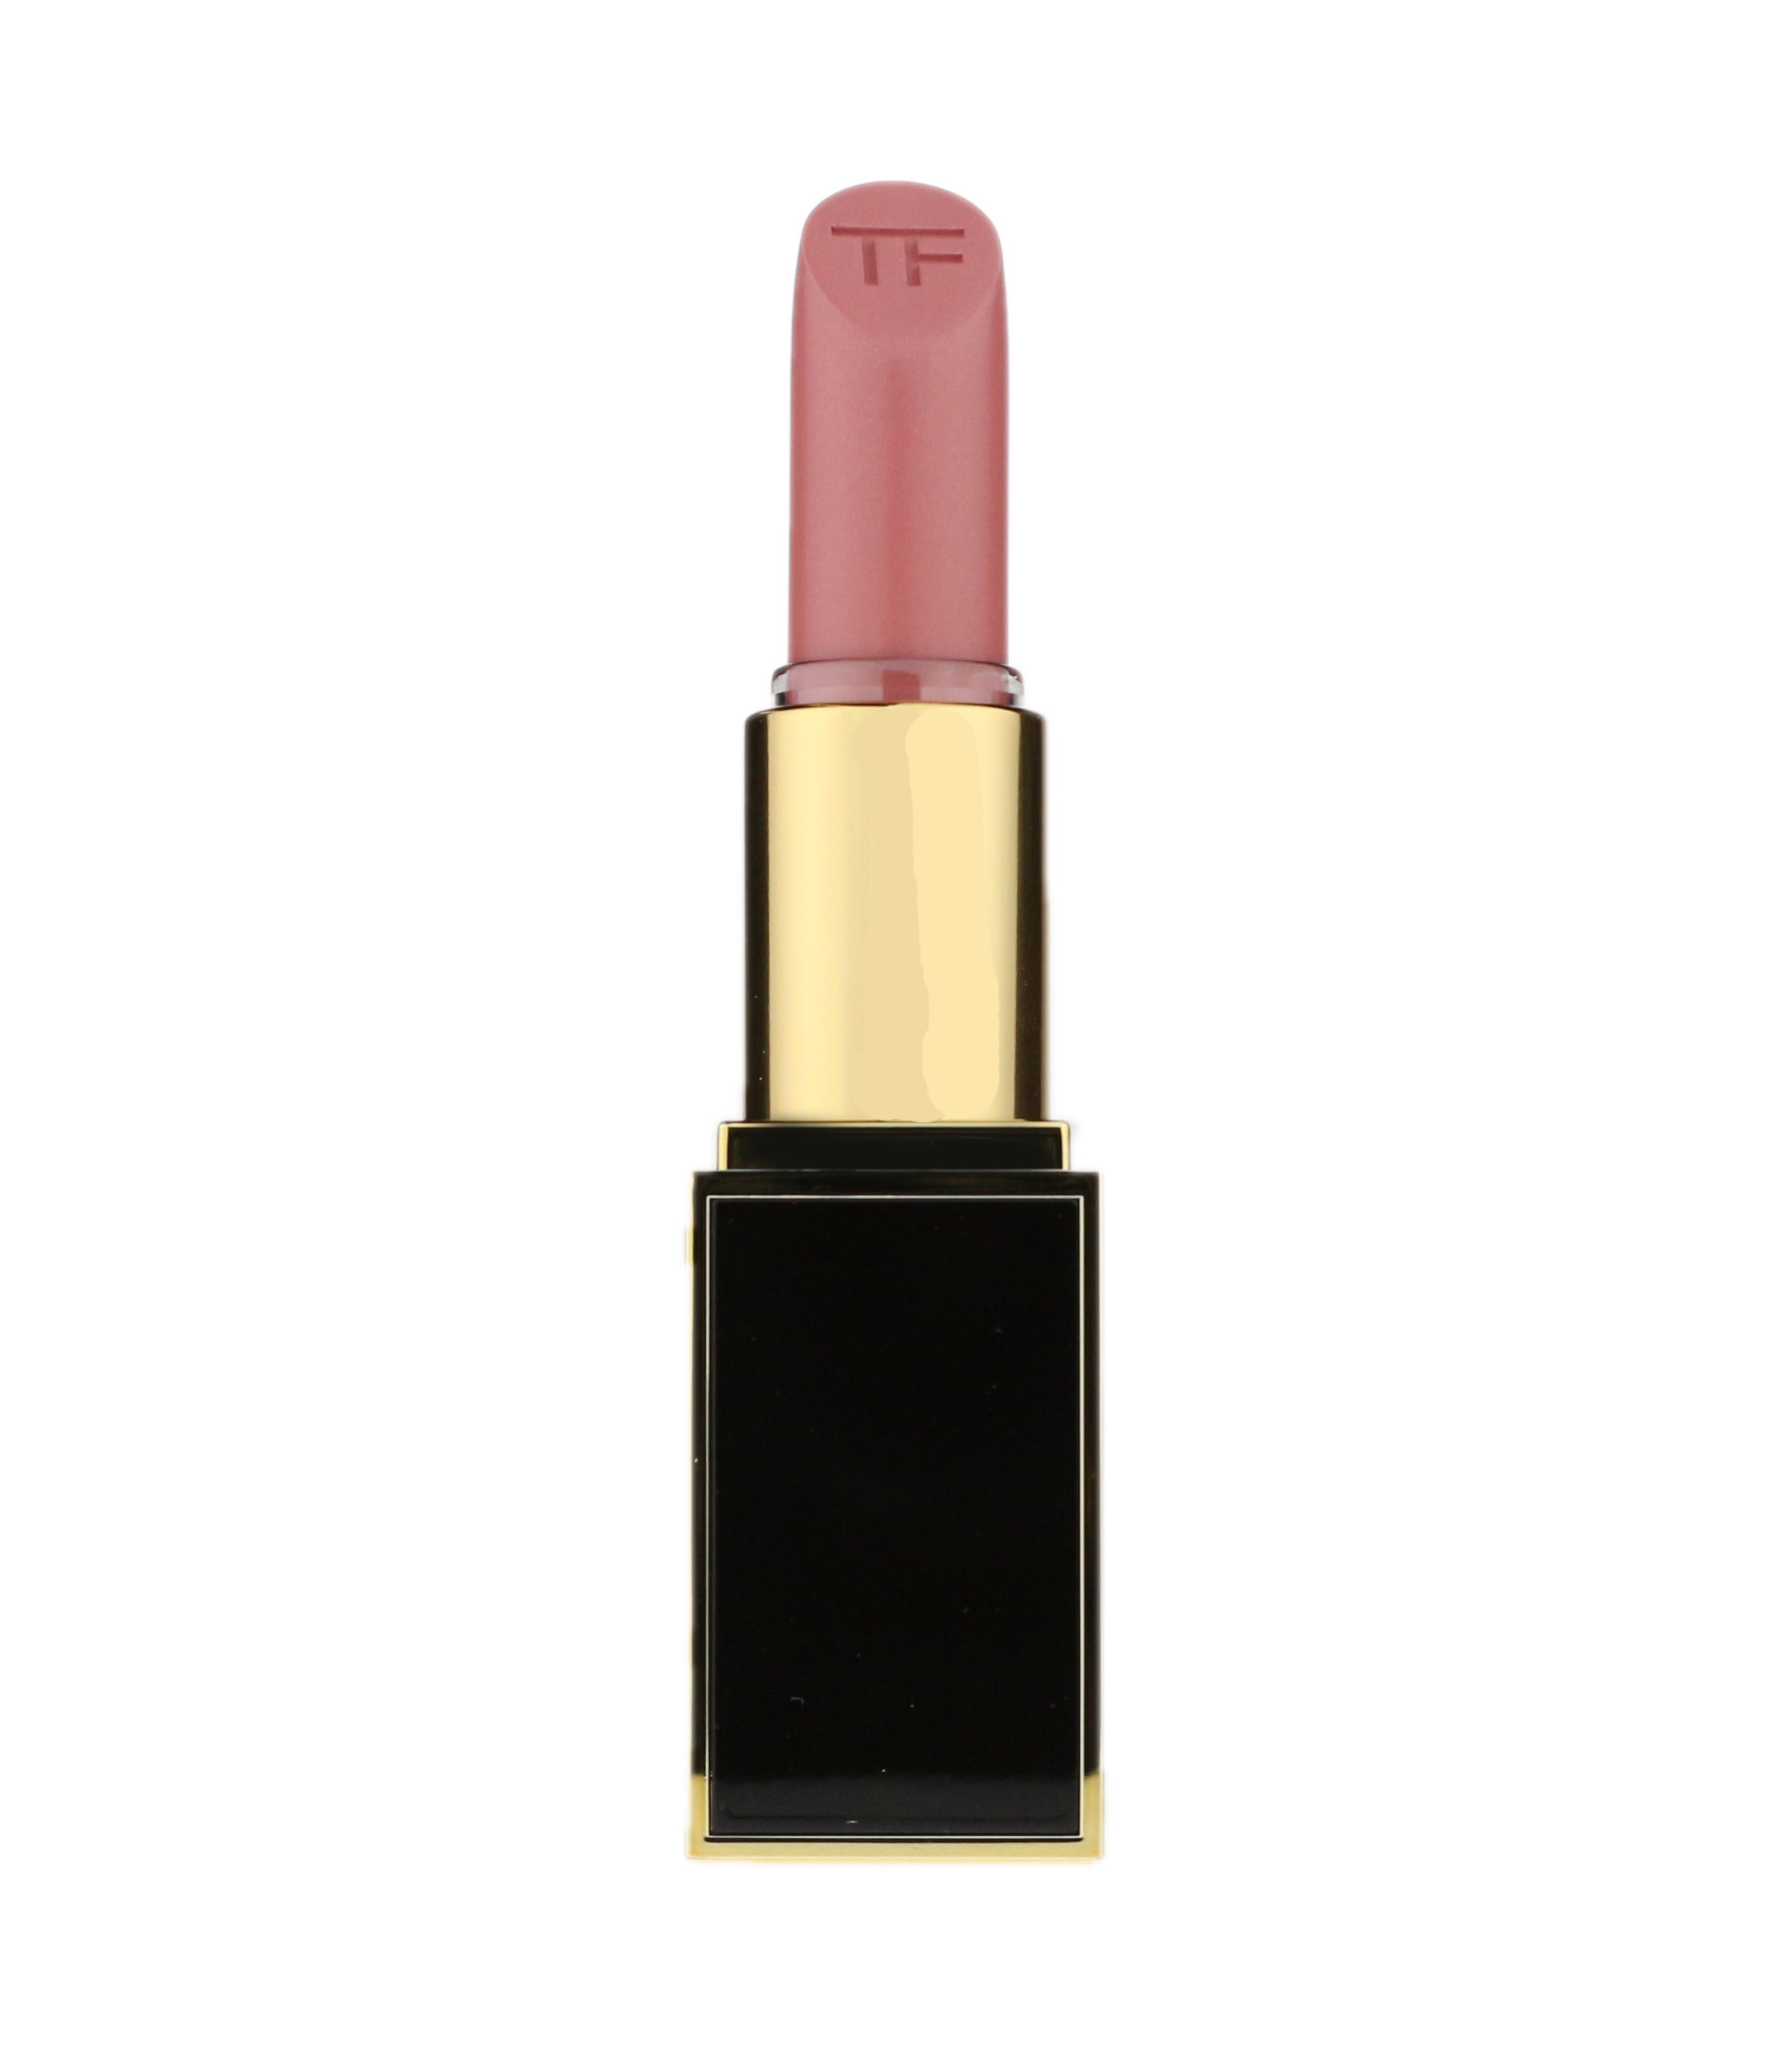 Settlers forretning under Tom Ford Lip Color 0.1oz/3g New In Box (Choose Your Shade!) - Walmart.com